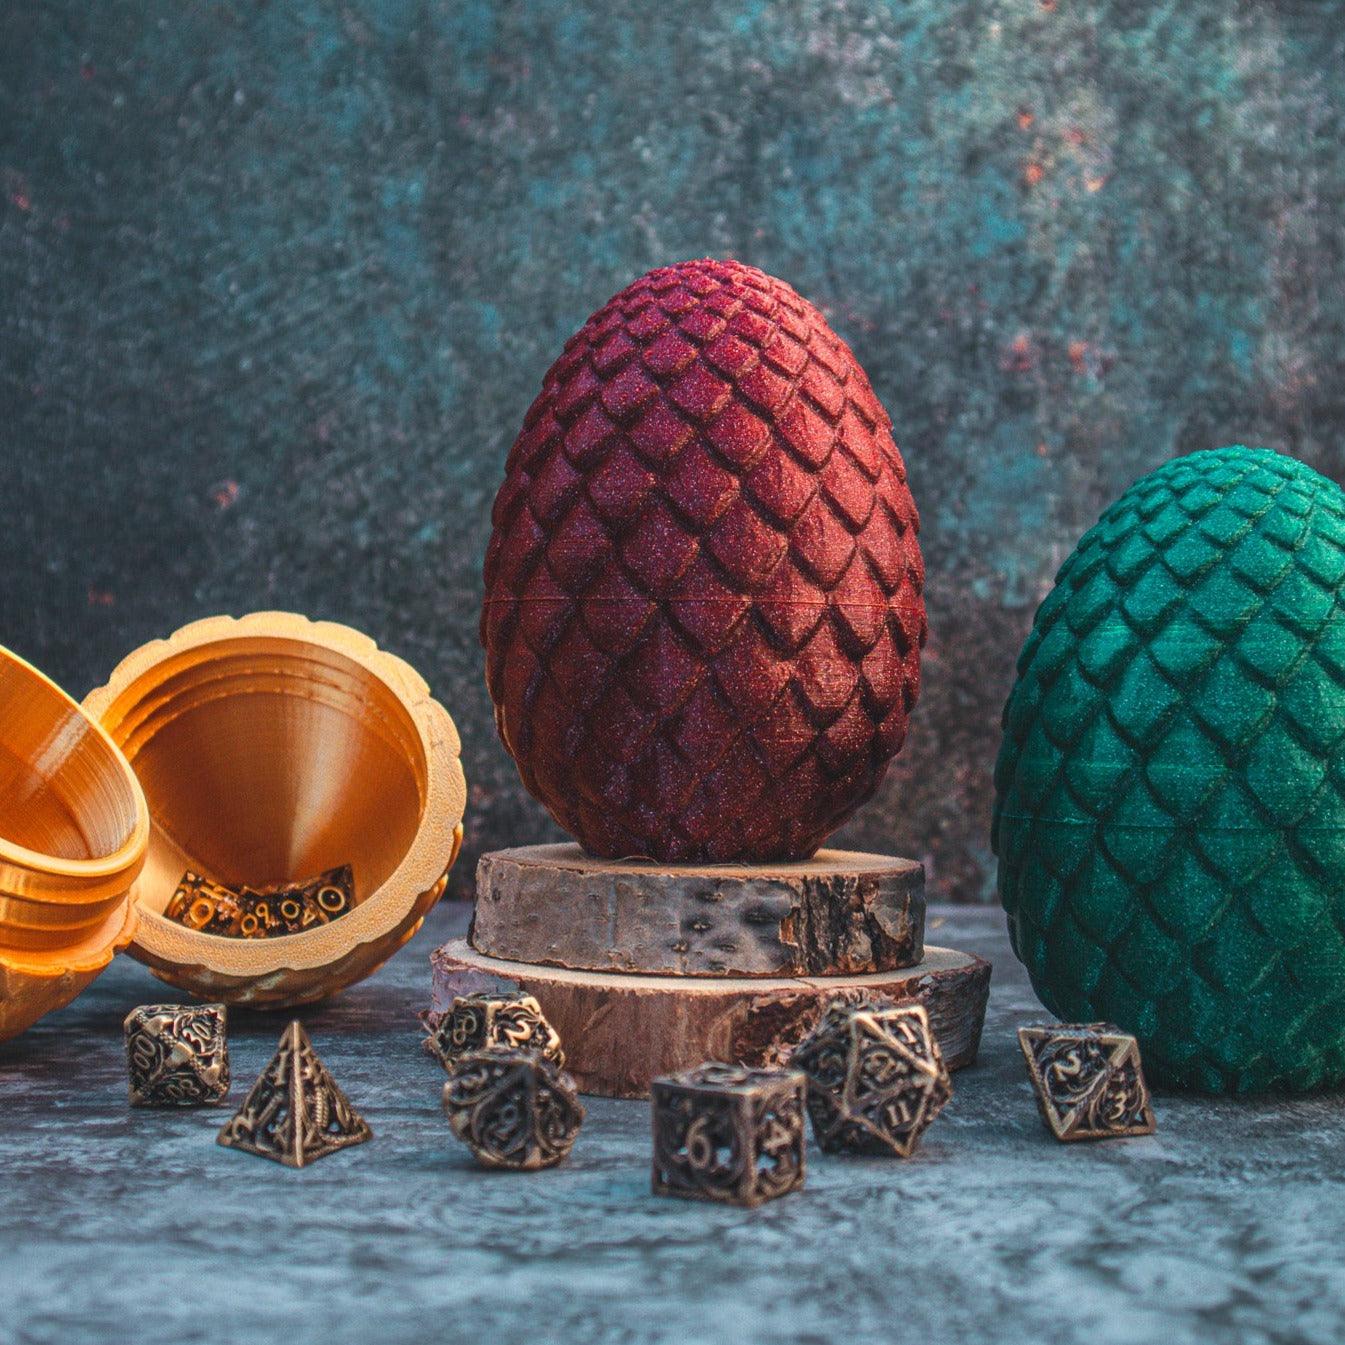 Dragon egg - screw on dice holder - The Flaming Feather & Flaming Filament